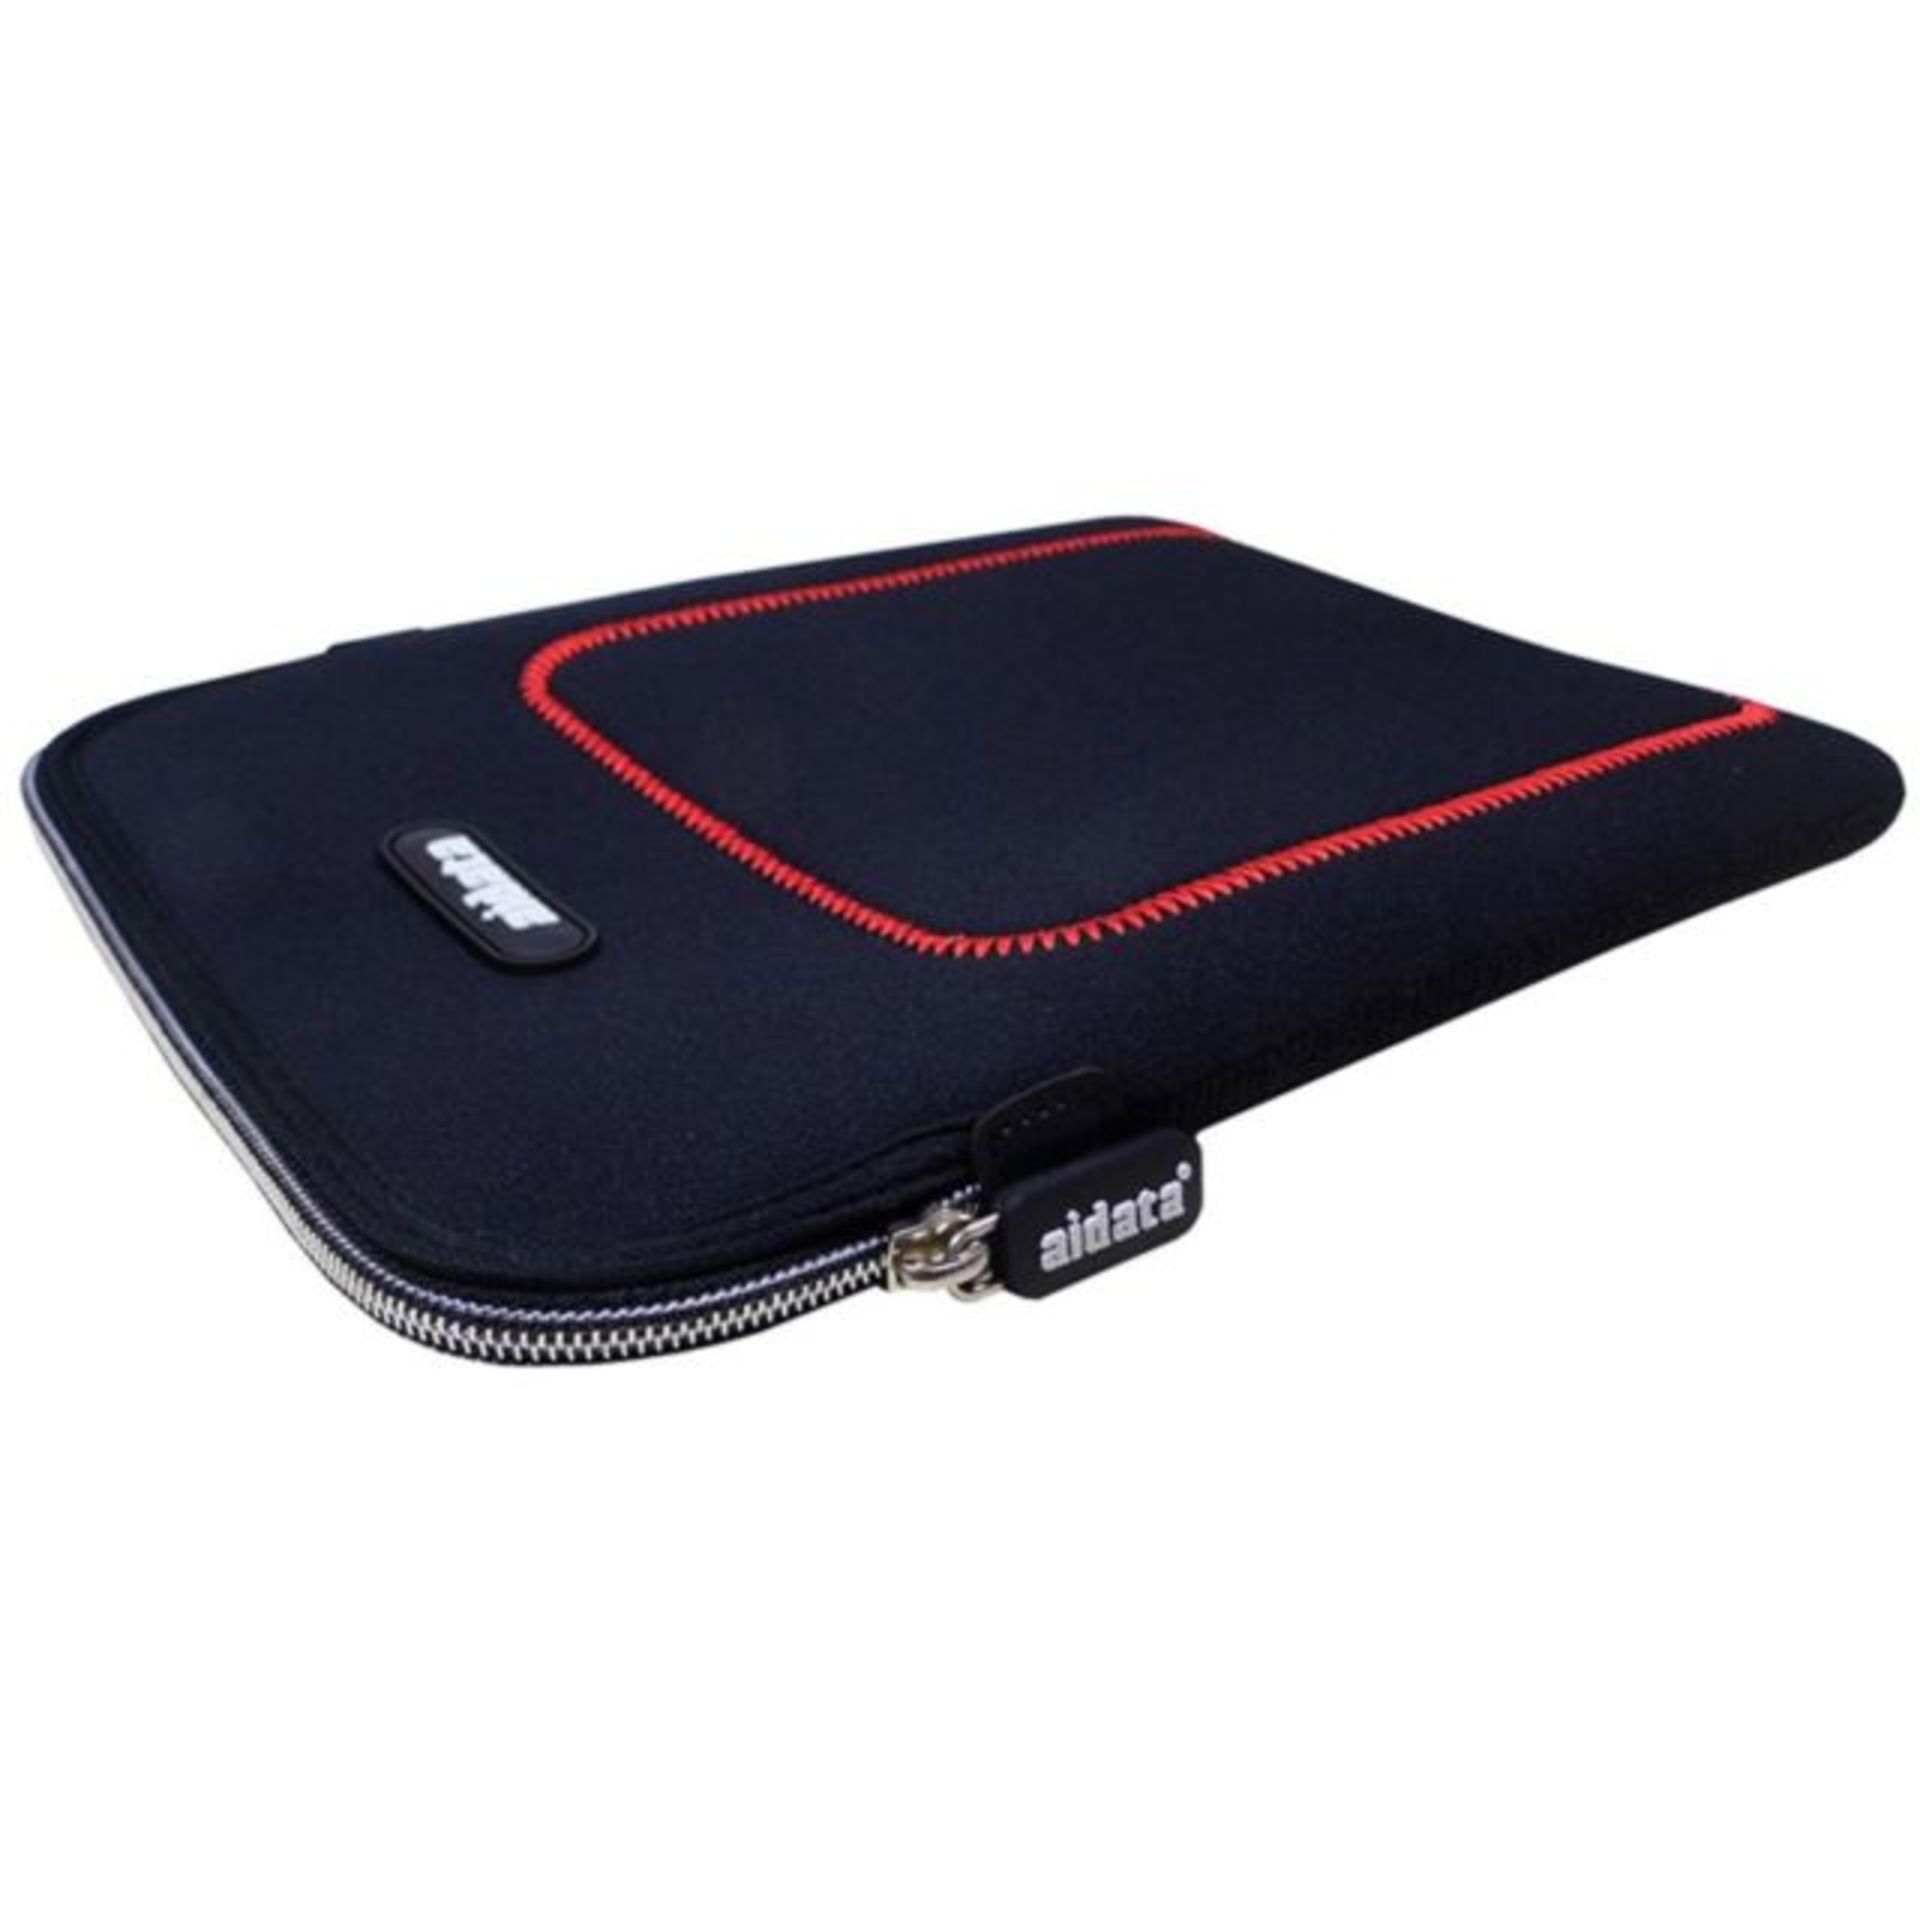 V Grade A A Lot Of Five Aidata iPad Neoprene Sleeves - Suitable For Up to 10" Tablets ISP £100 (